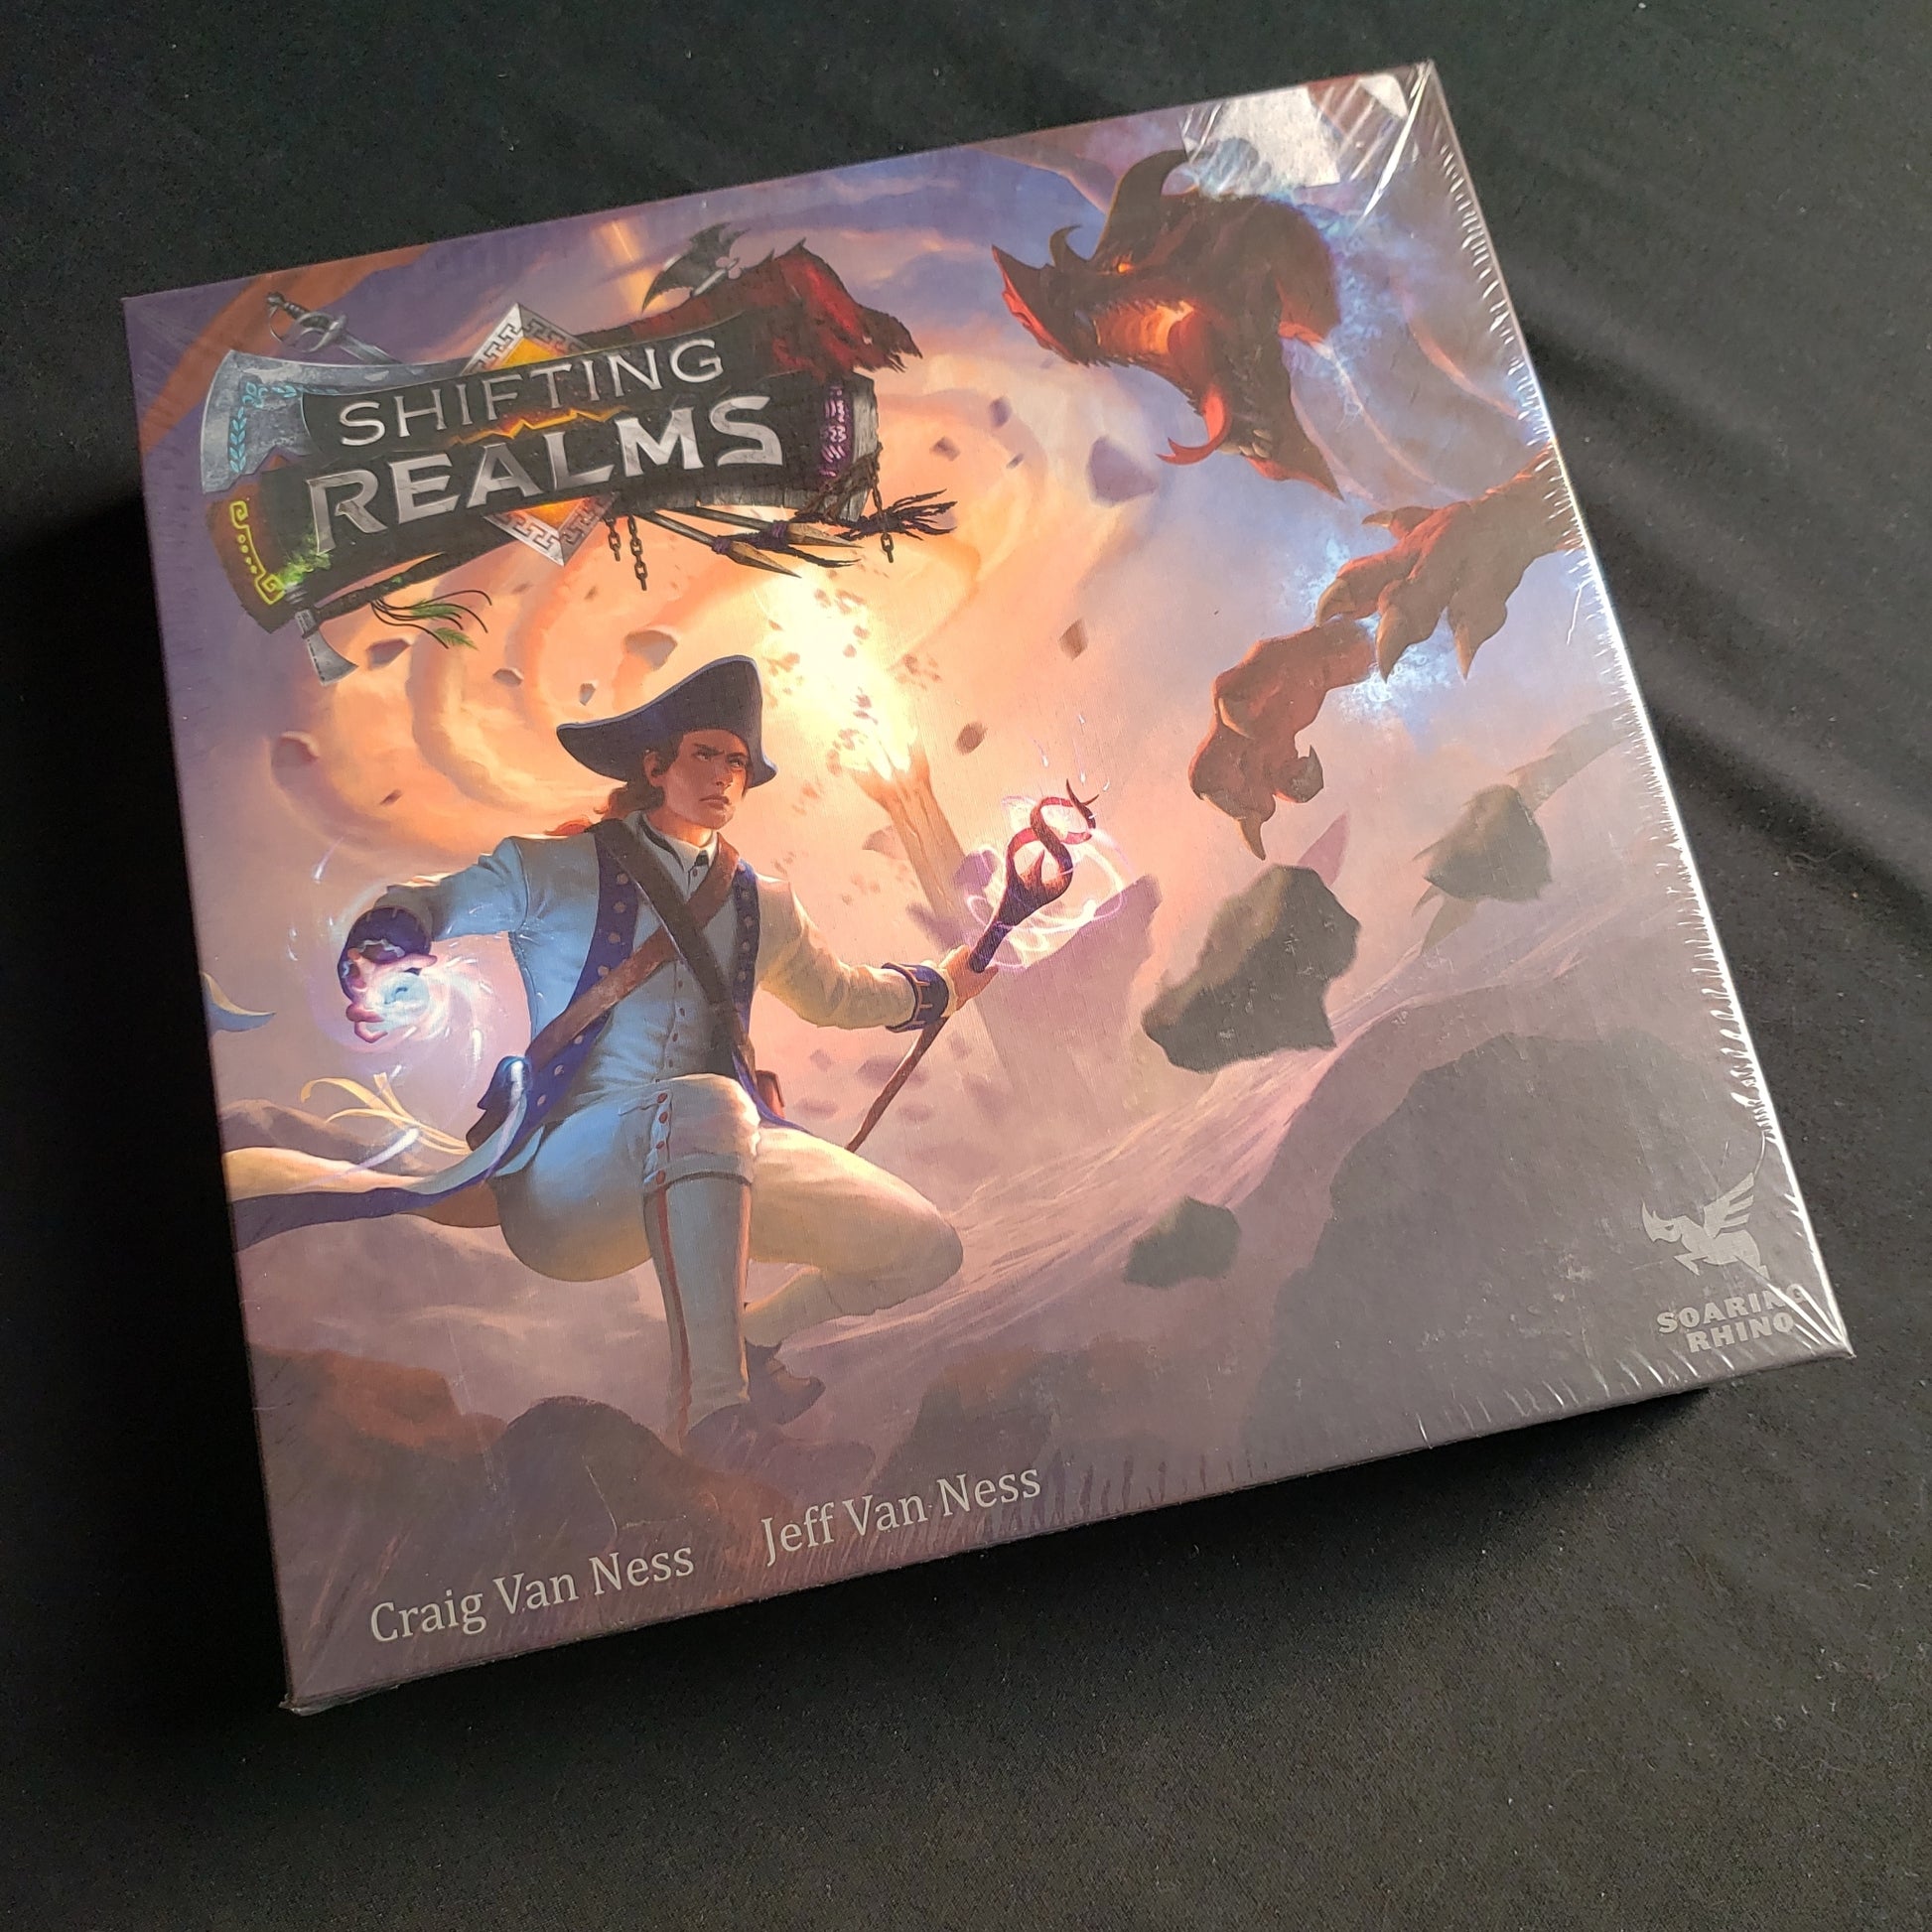 Image shows the front cover of the box of the Shifting Realms board game